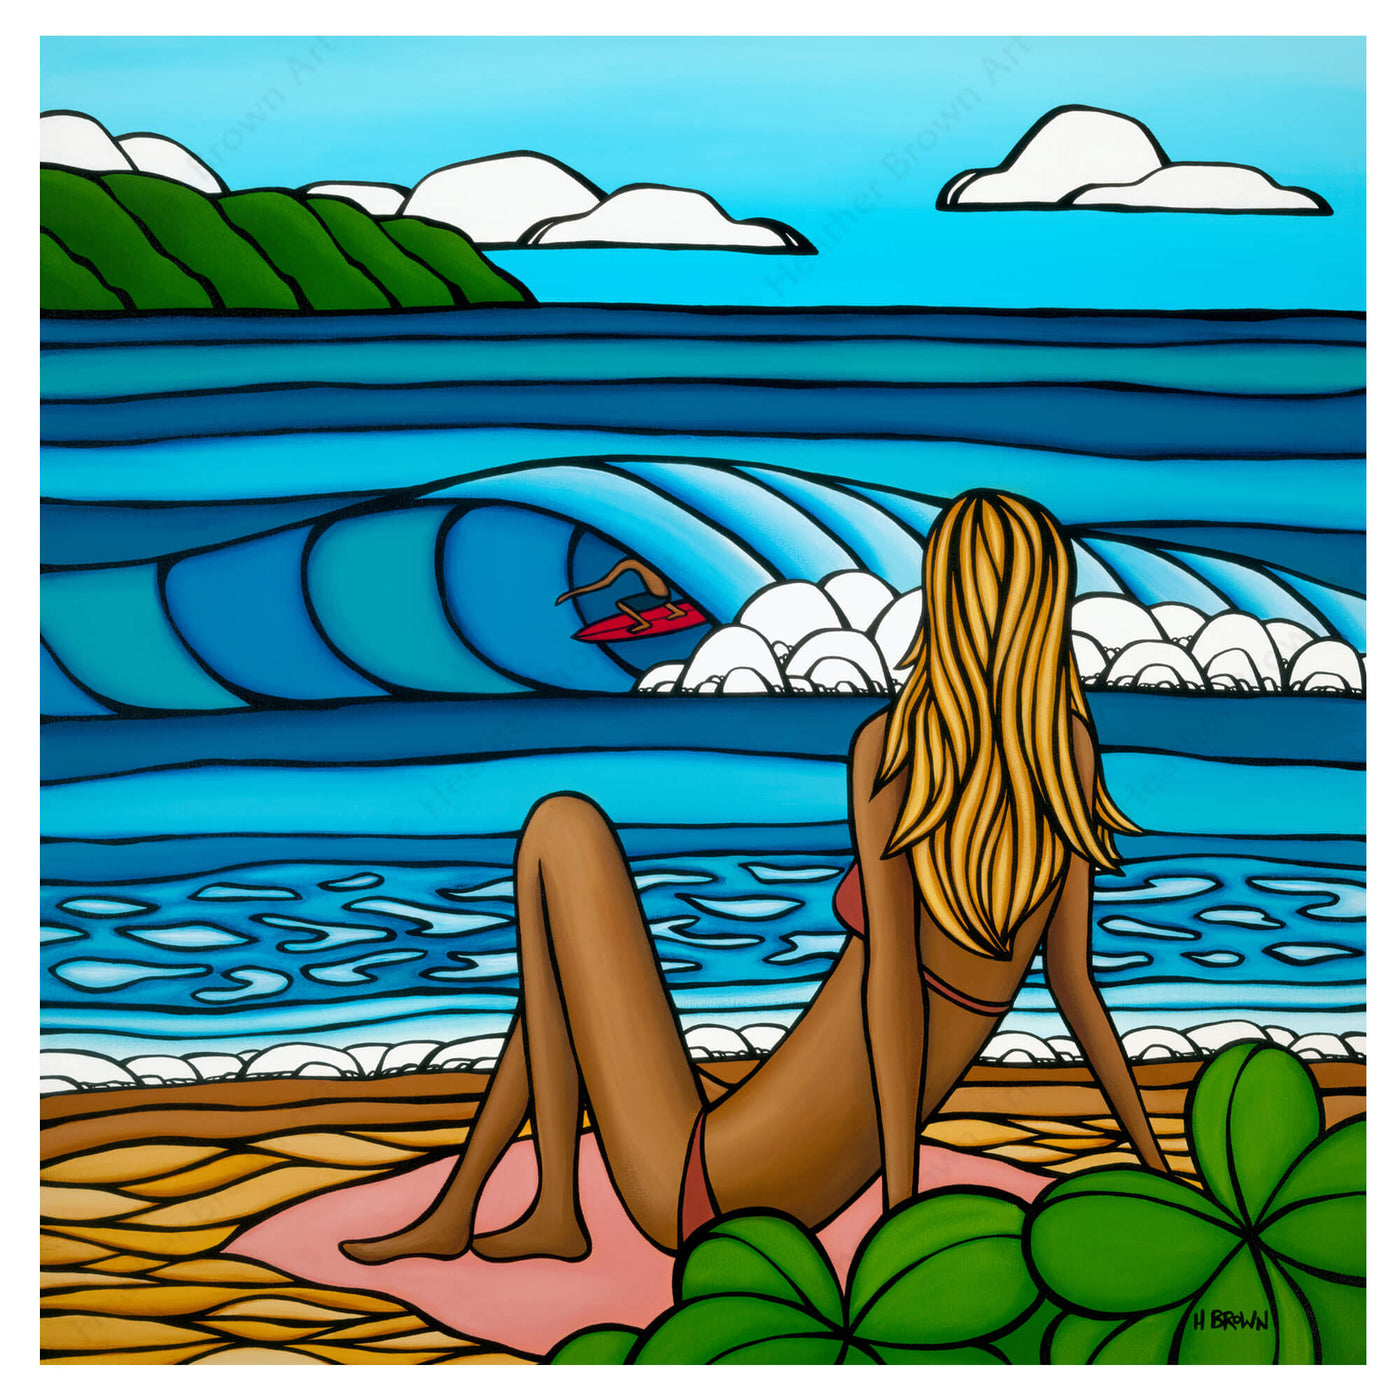 A woman at the beach by Hawaii surf artist Heather Brown